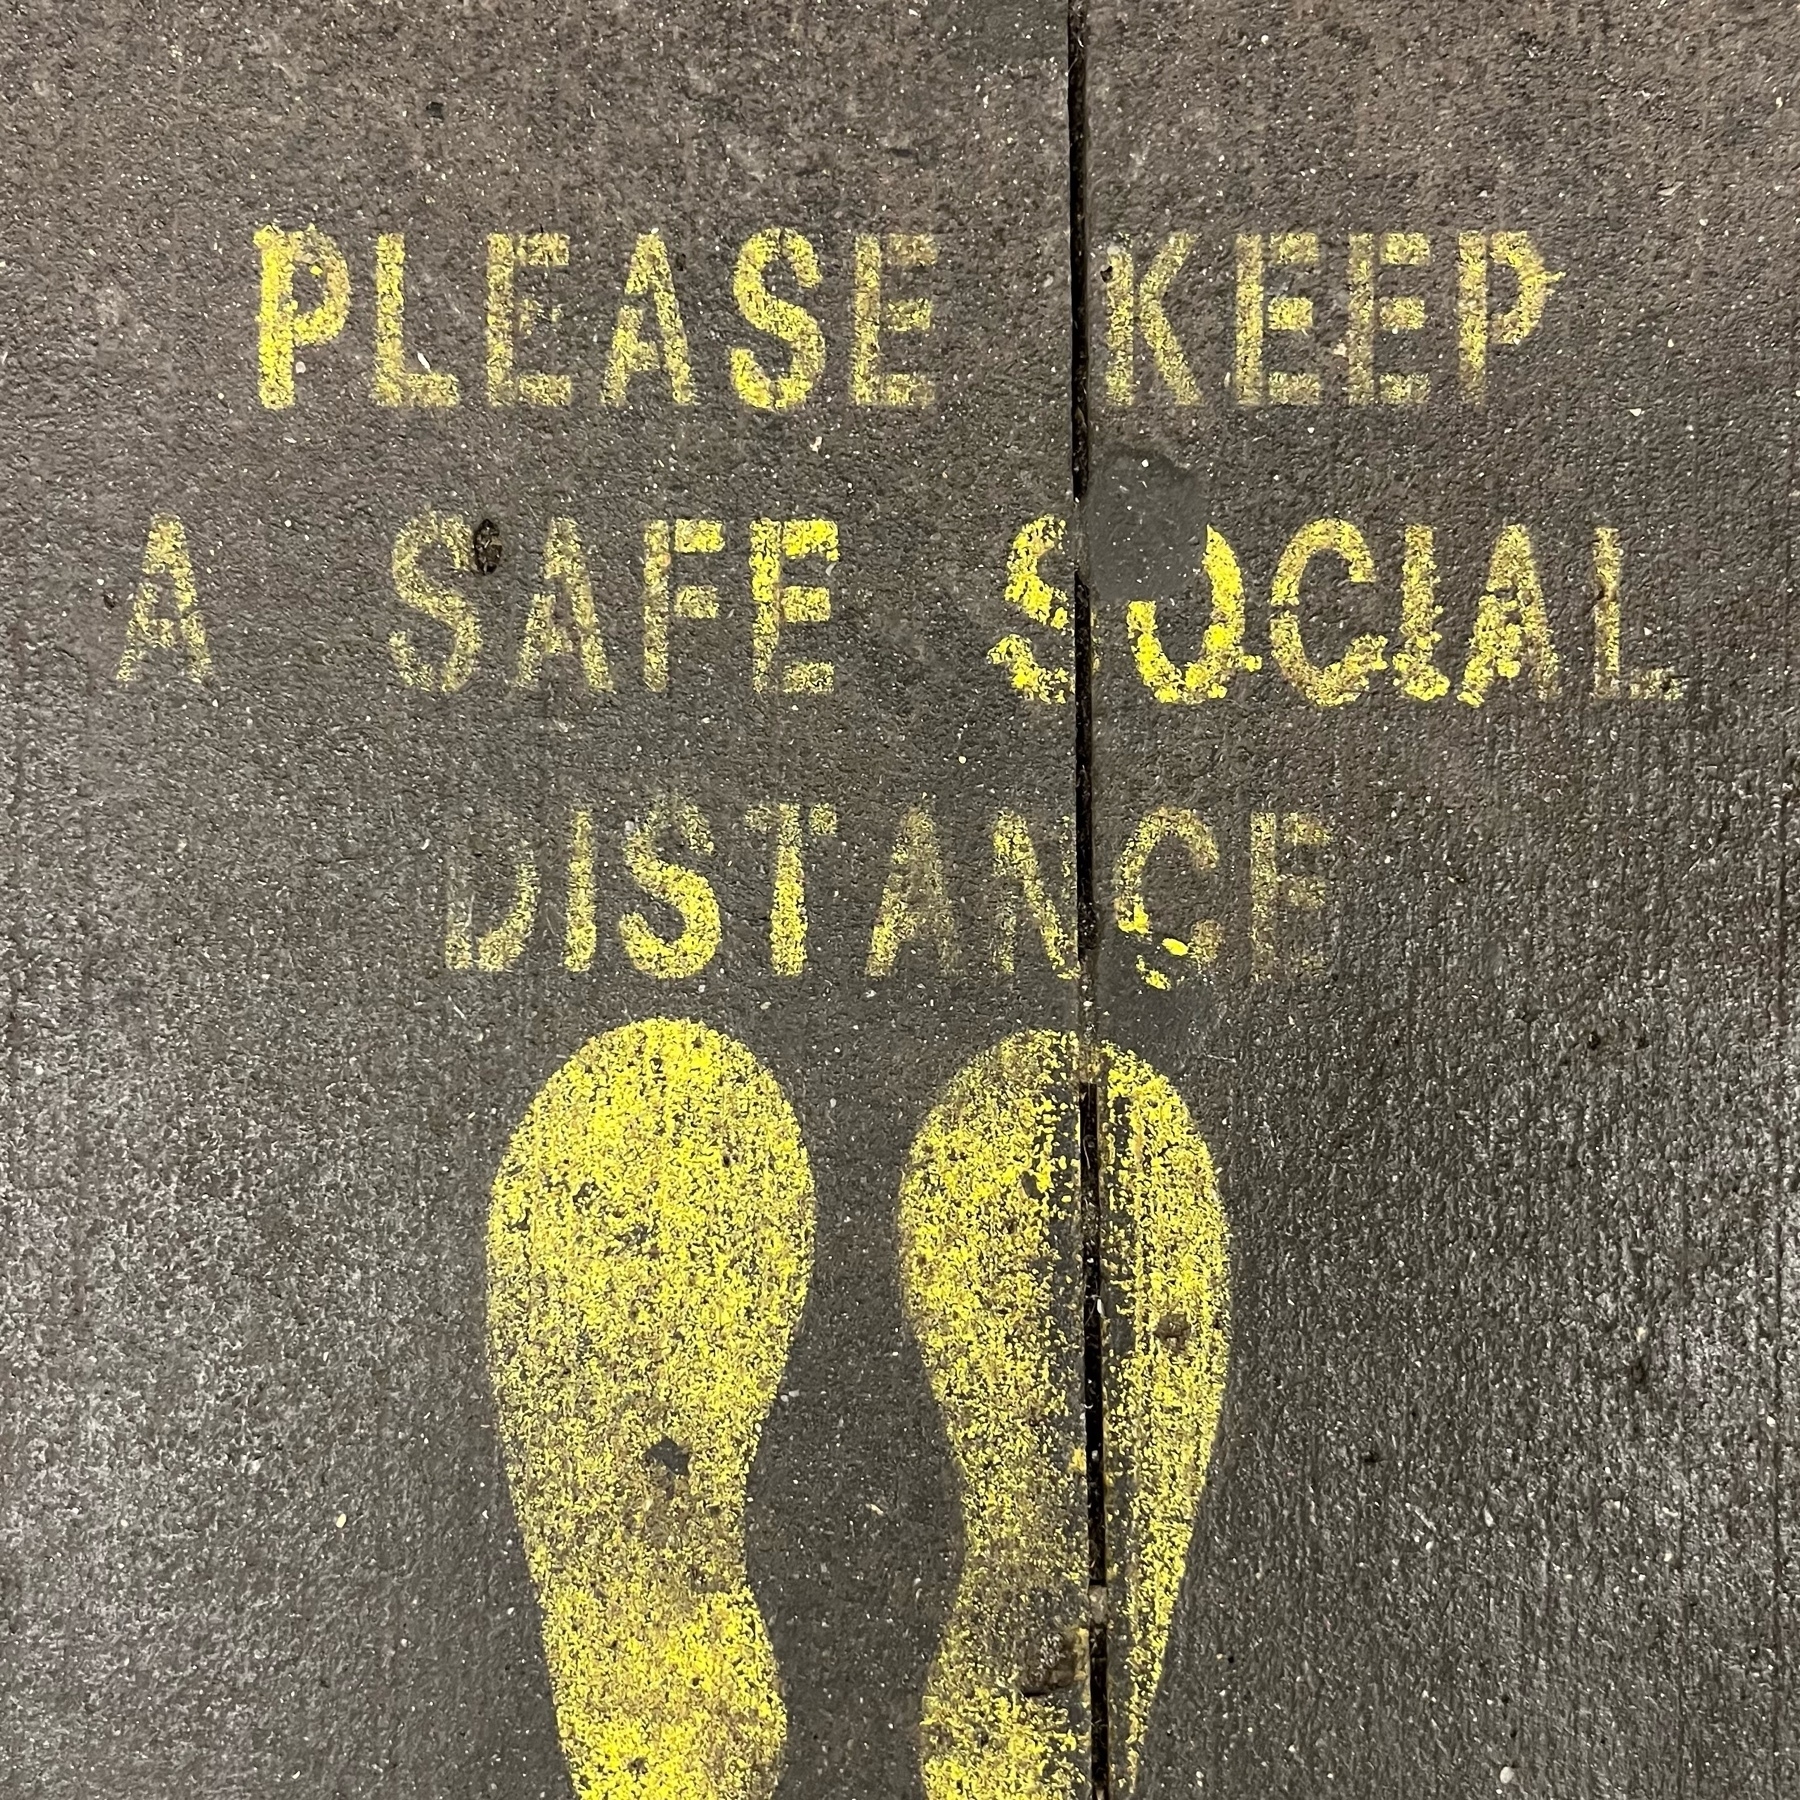 stencil painted on subway platform with feet outline and text "please keep a safe social distance"